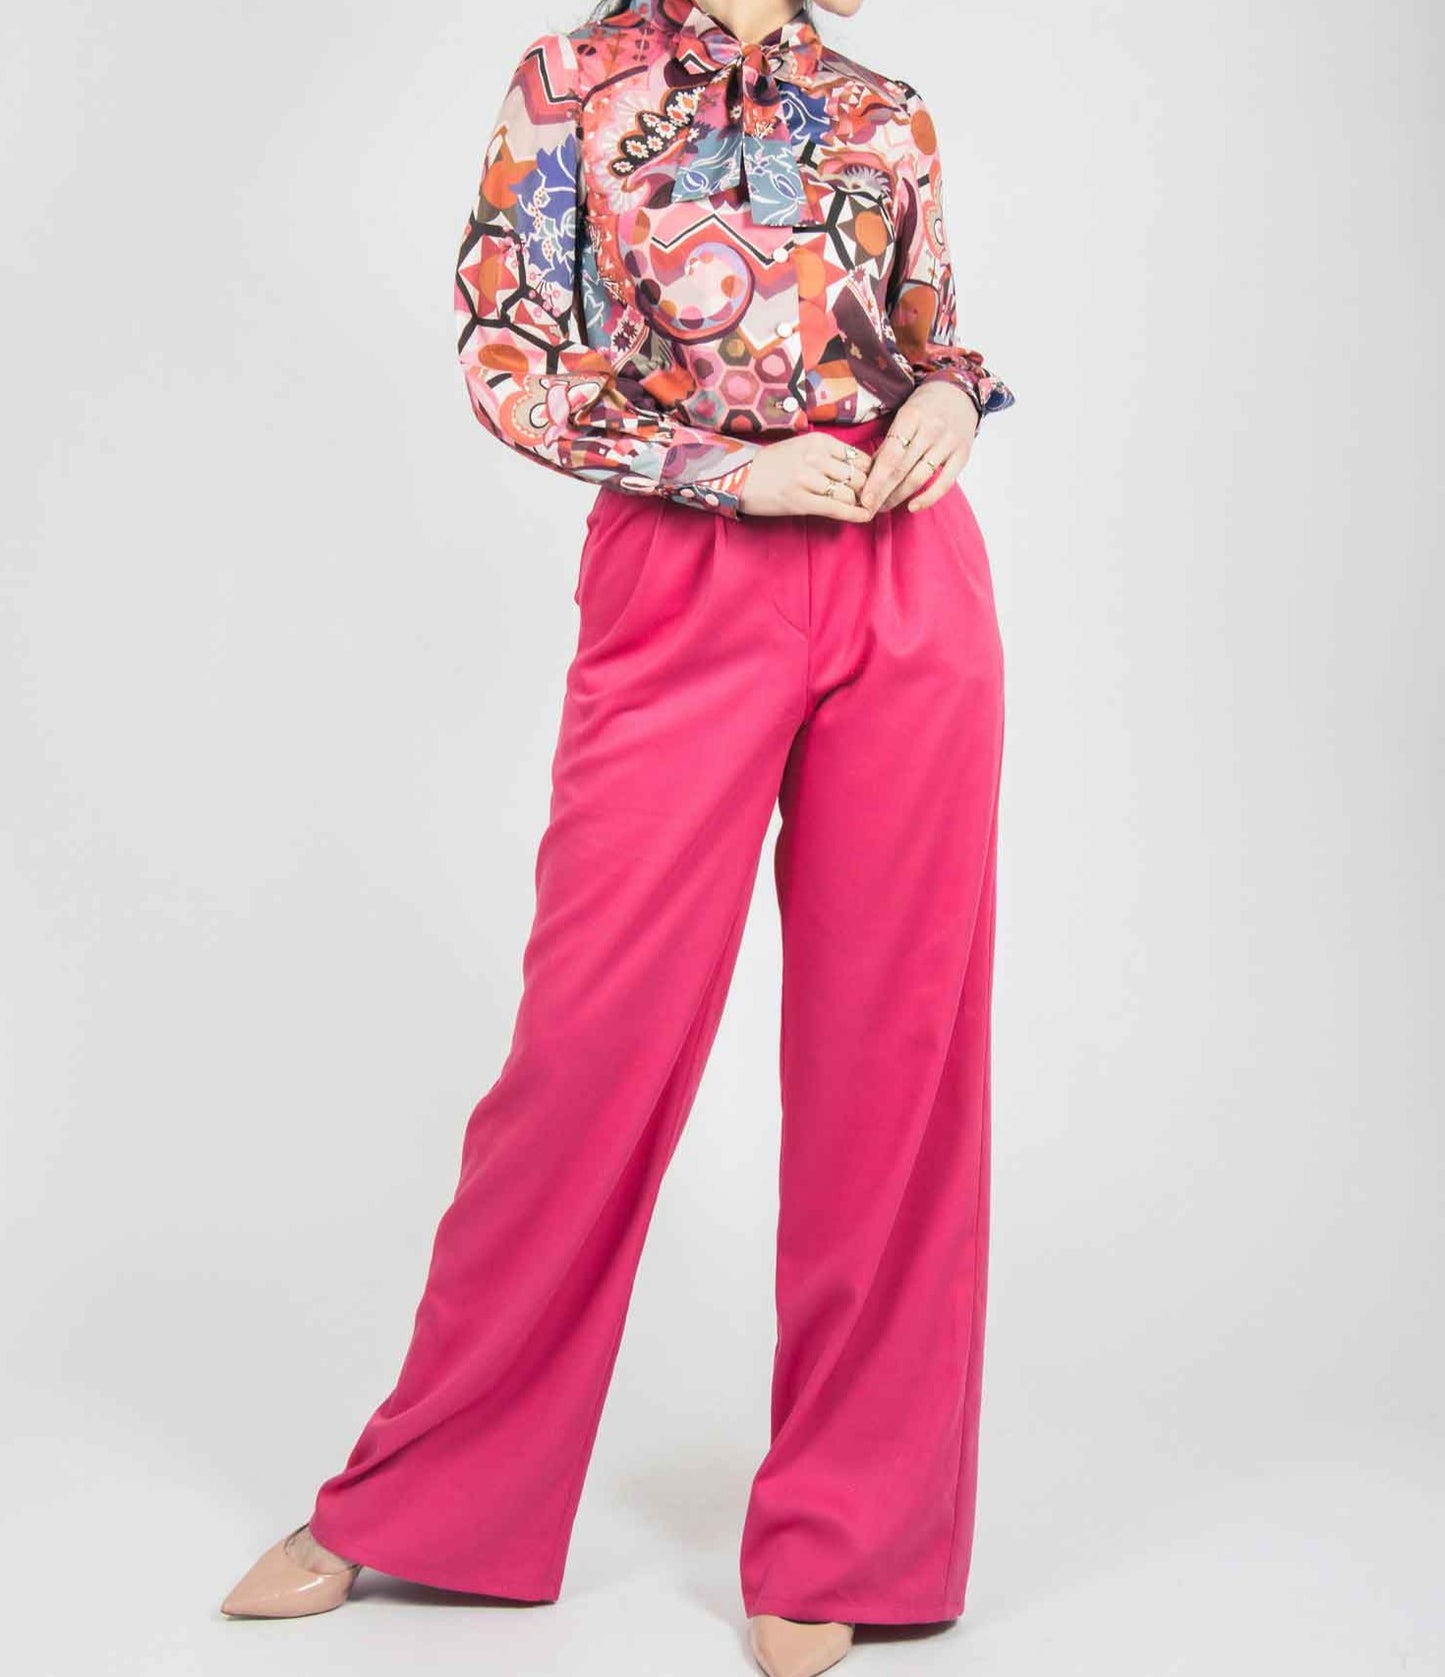 ladies office fashion statement blouse and pink linen trousers womens occasion wear